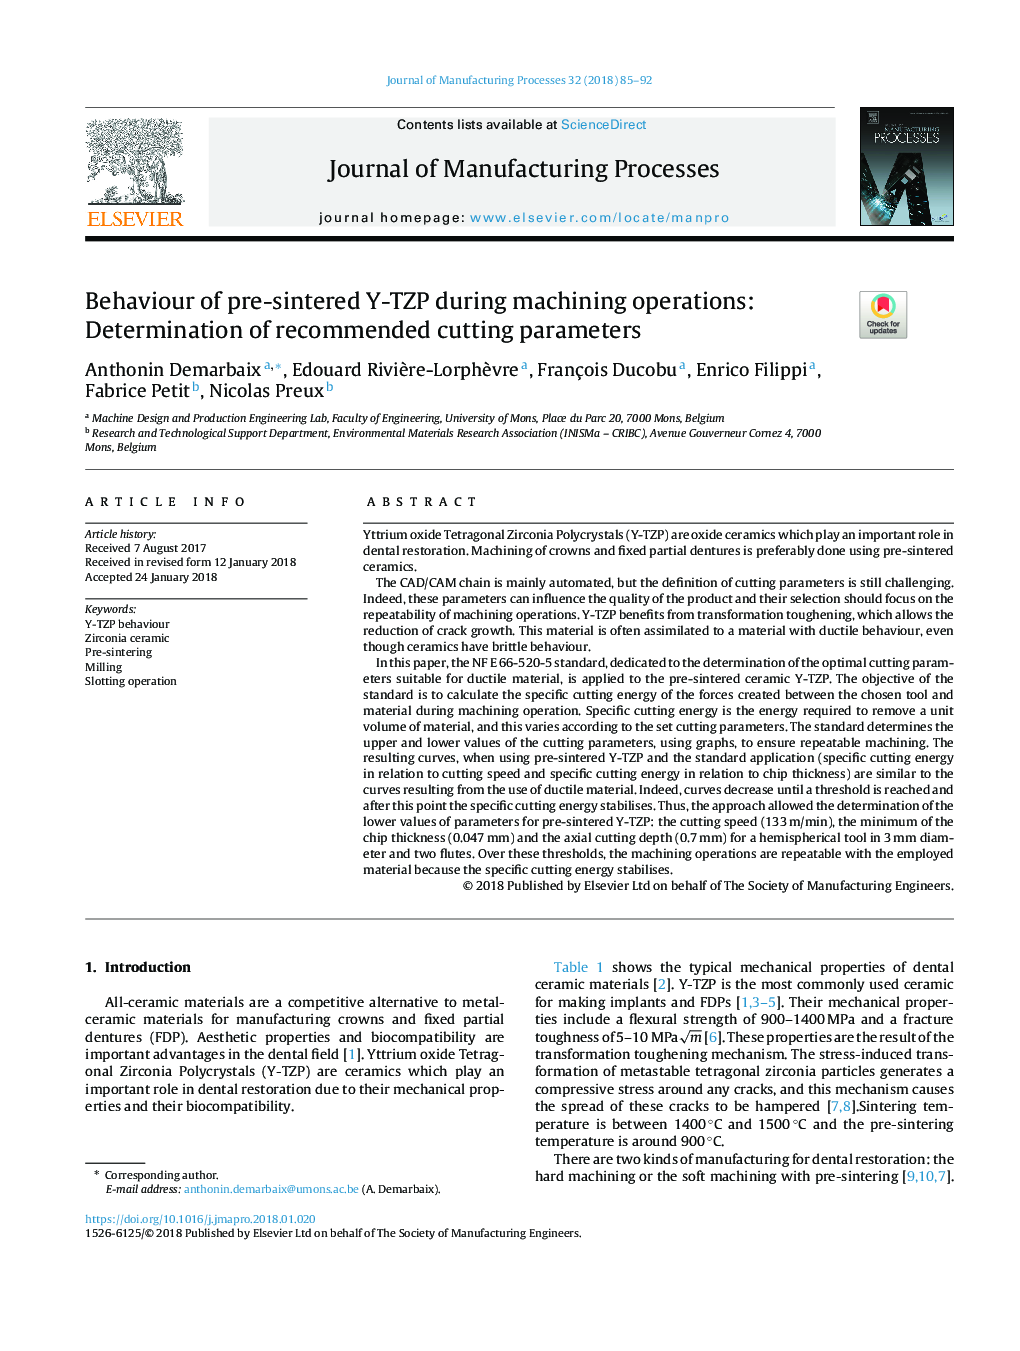 Behaviour of pre-sintered Y-TZP during machining operations: Determination of recommended cutting parameters